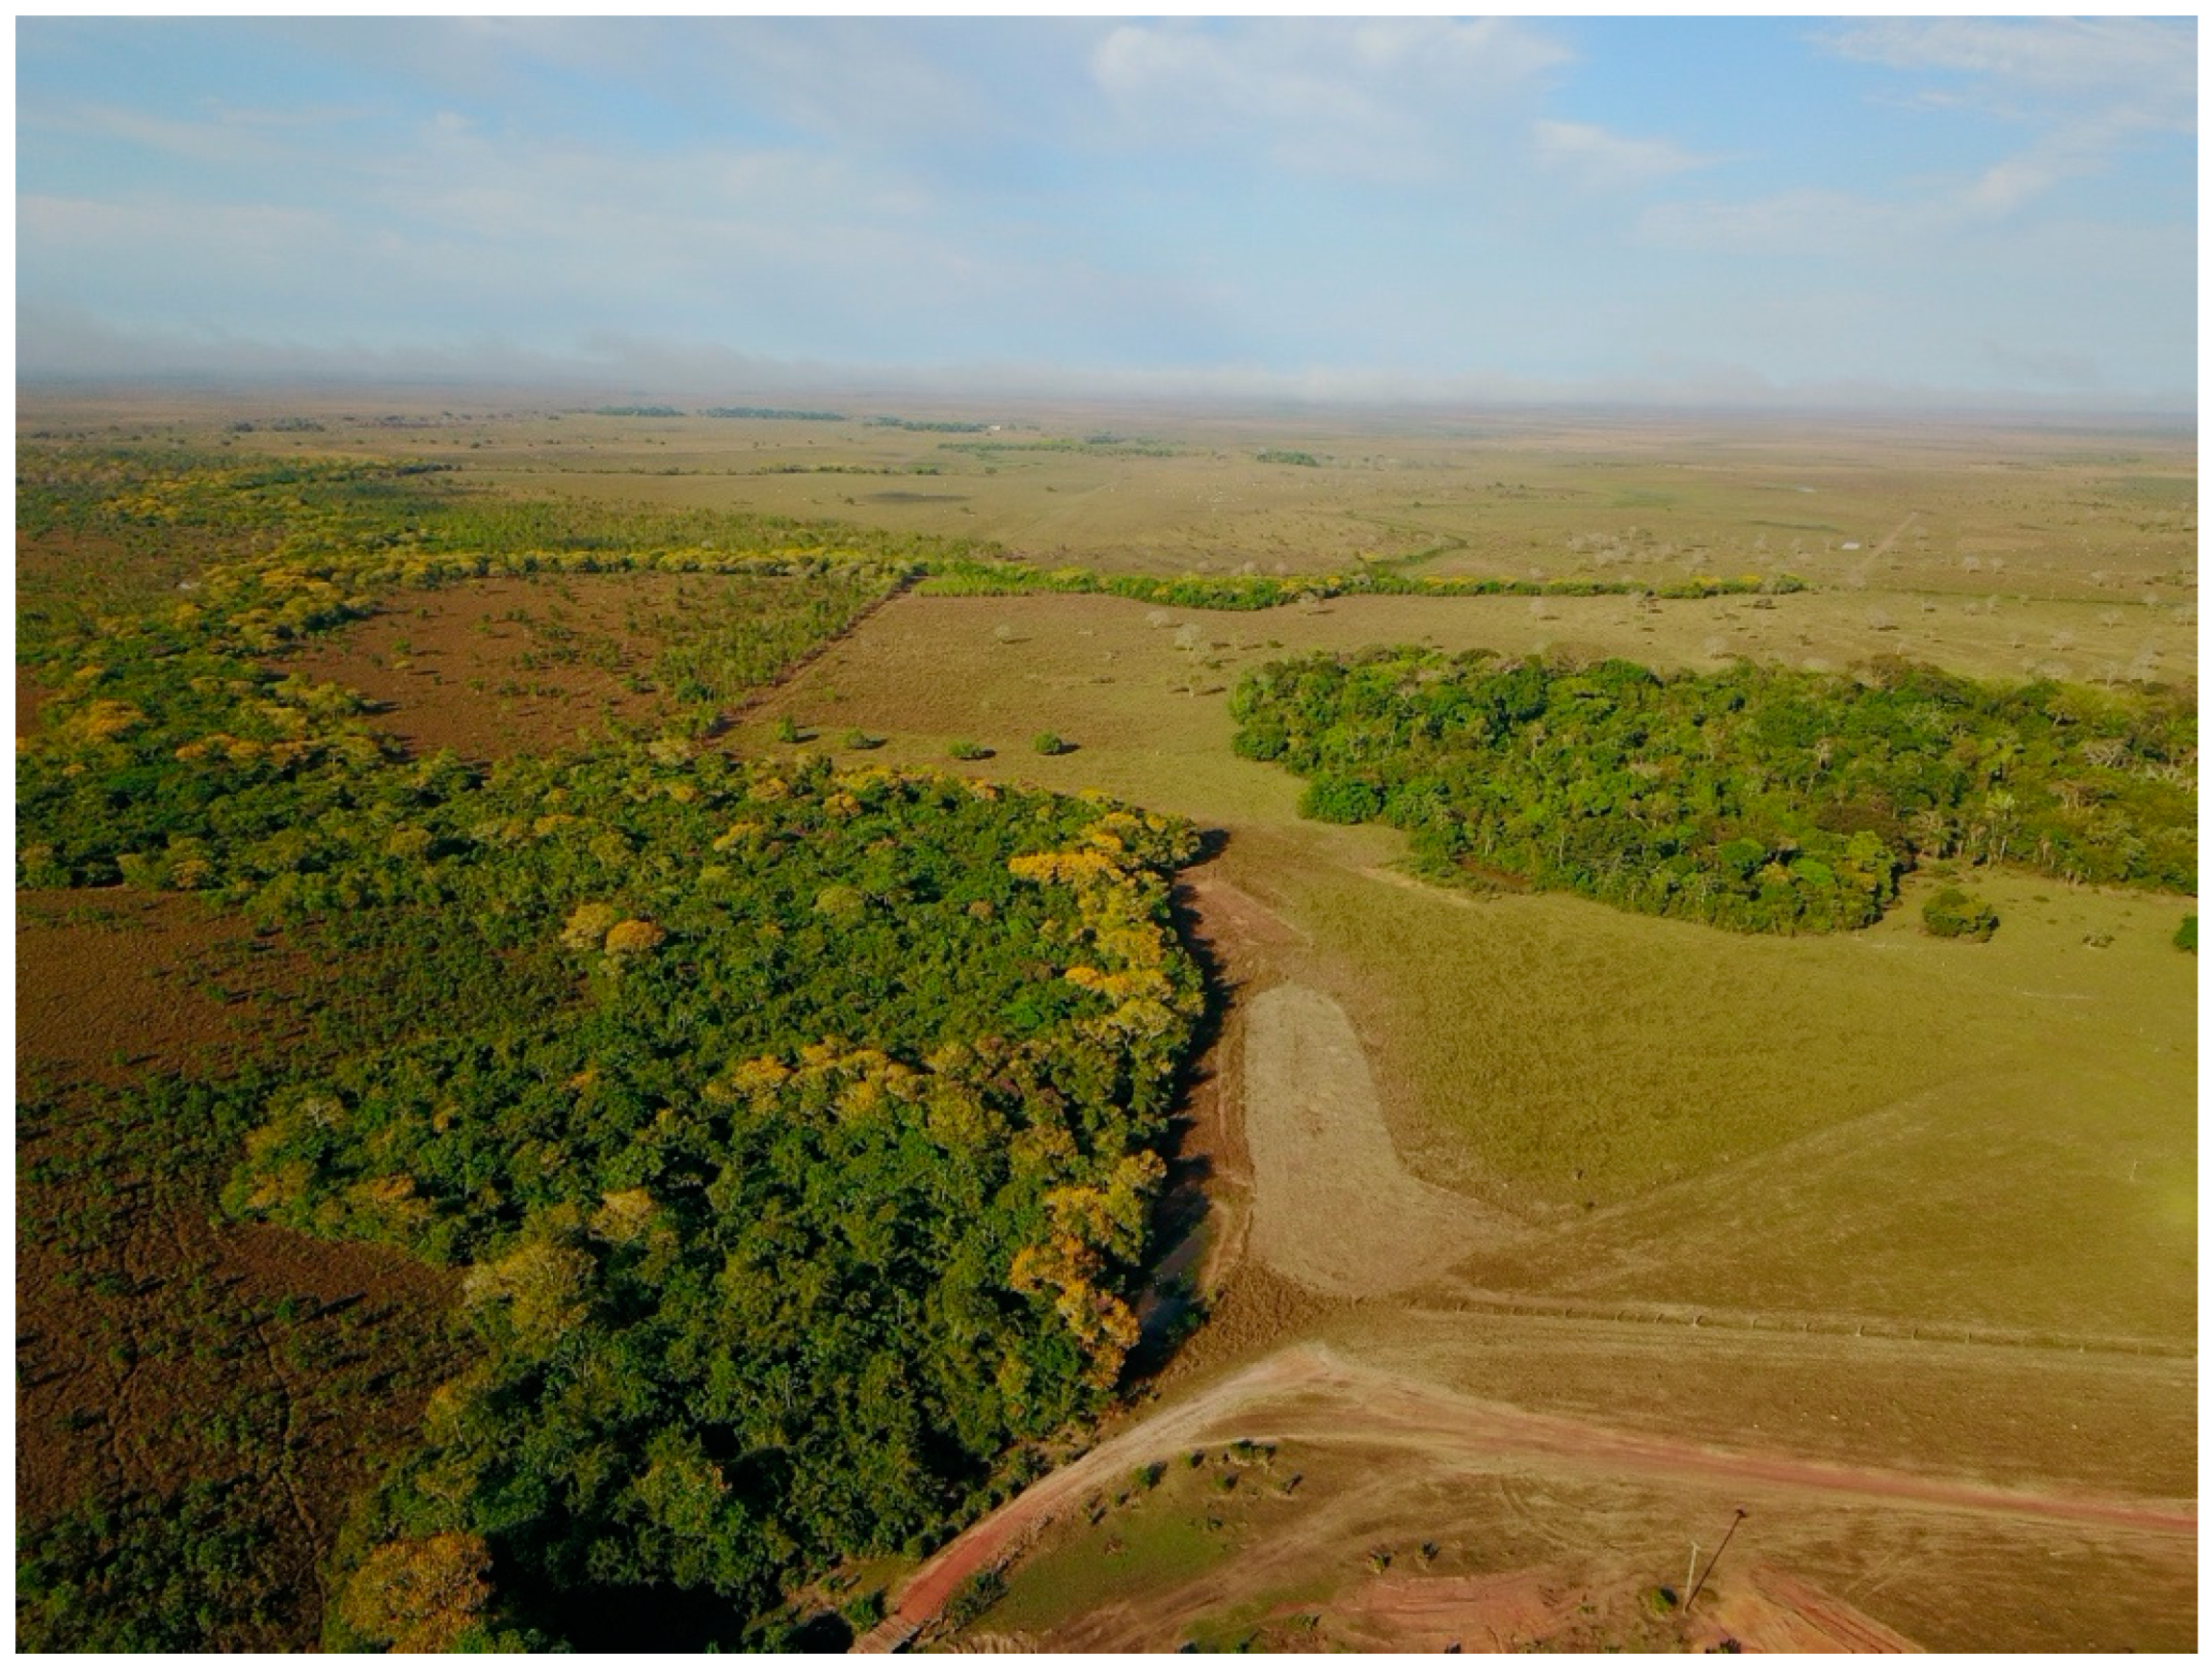 Land | Free Full-Text | Forests and Farmers: GIS Analysis of Forest Islands  and Large Raised Fields in the Bolivian Amazon